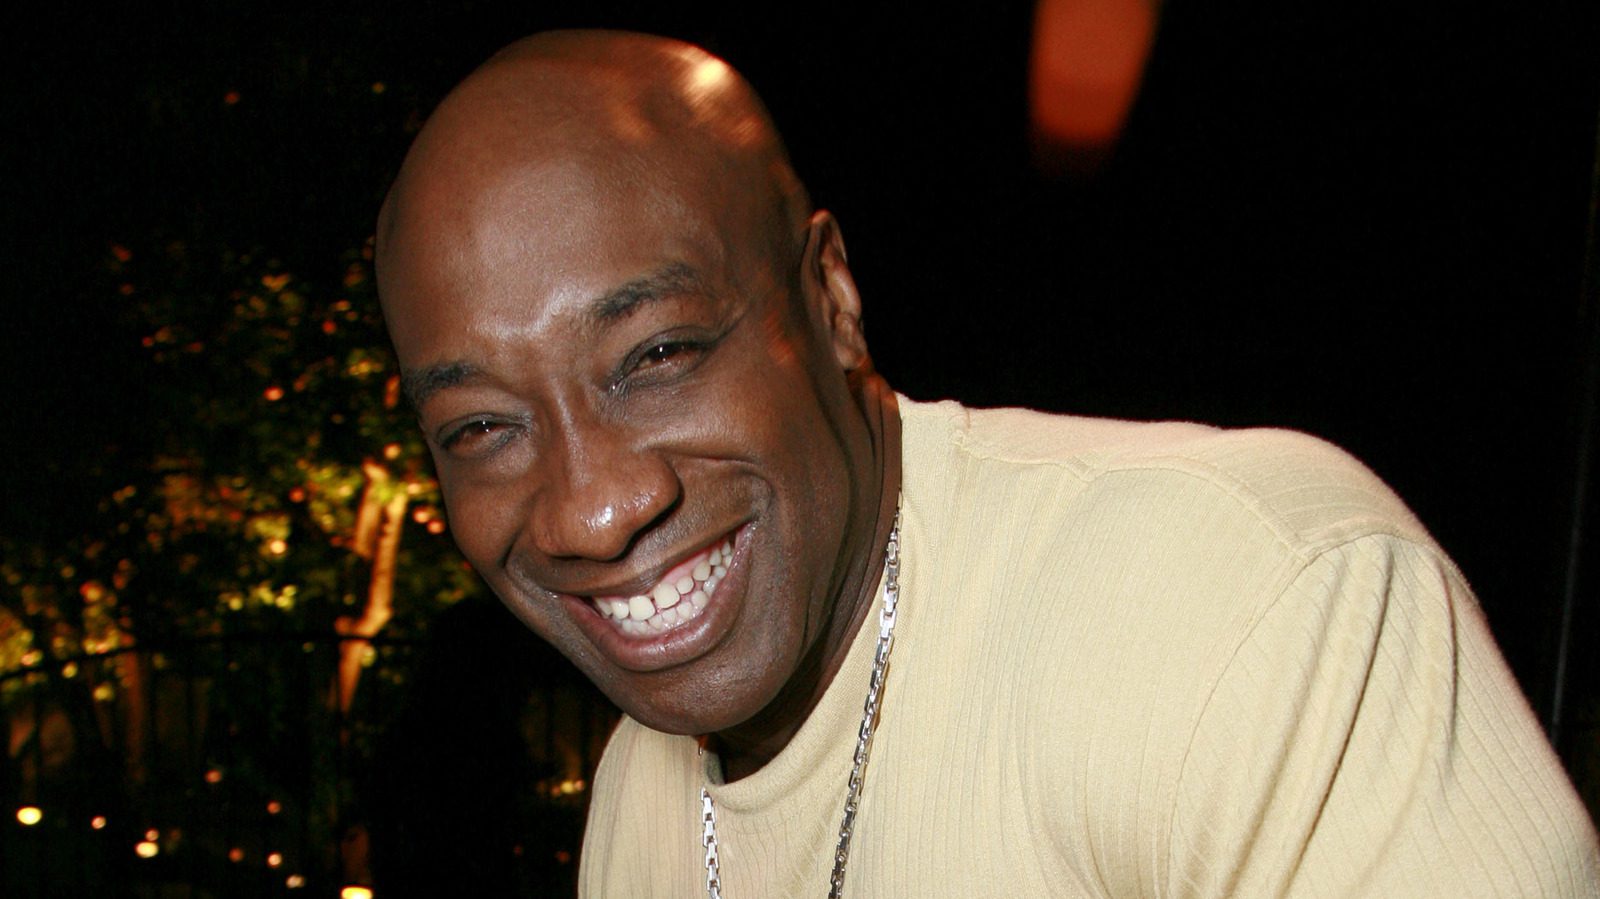 Michael Clarke Duncan Voiced More Of Your Childhood Than You Likely Realized